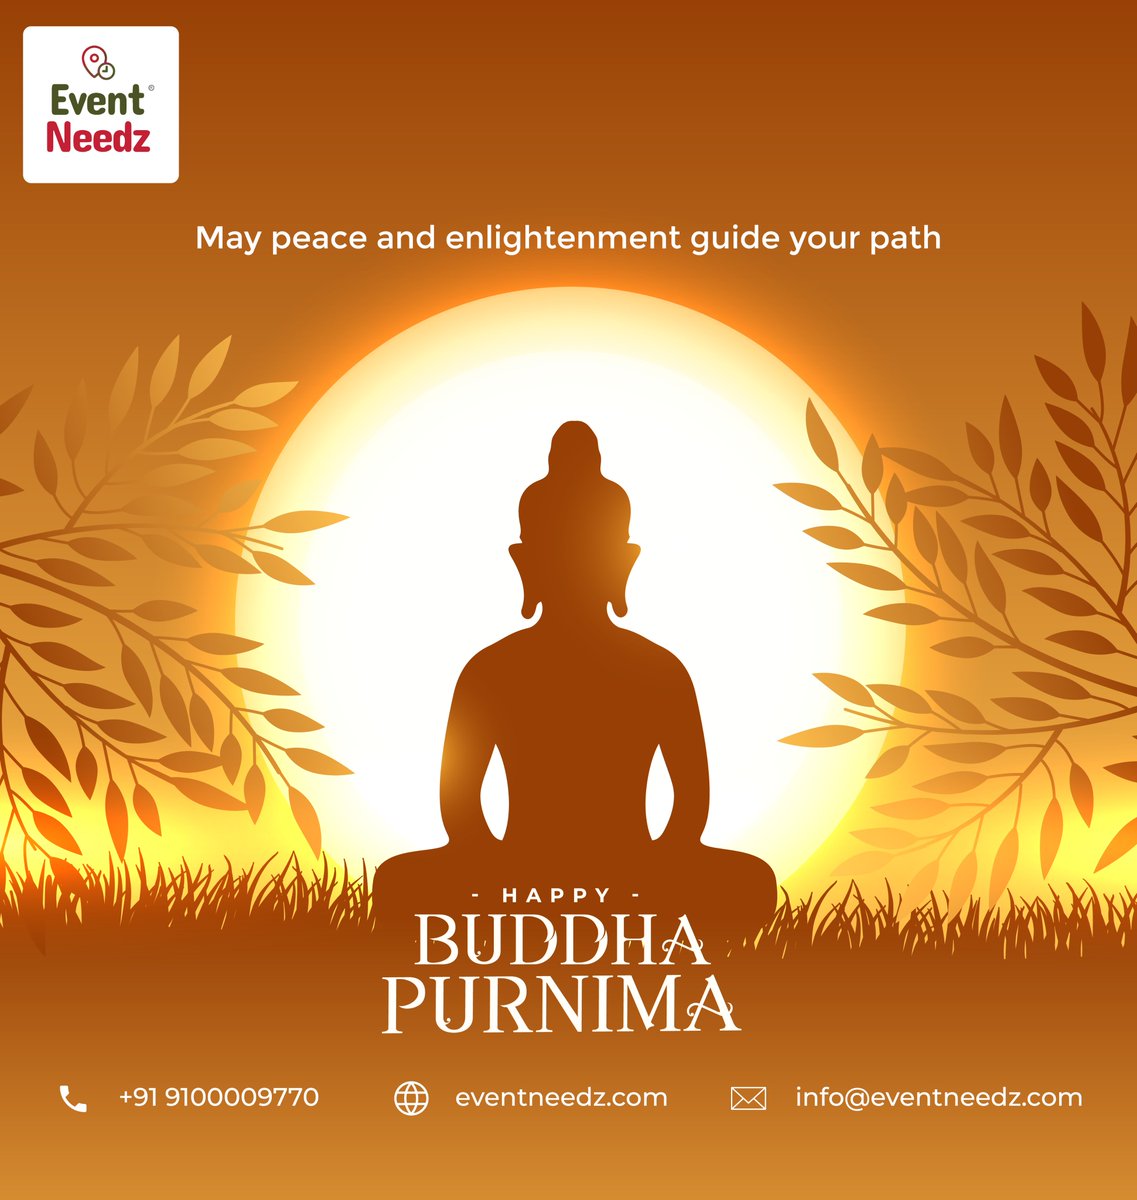 May the teachings of Buddha guide you on the path of peace and enlightenment. Wishing everyone a serene and joyful Buddha Purnima! 📷📷

📷eventneedz.com
📷+91 9100009770

#buddhapurnima #buddhapurnima2024 #eventneedz #eventplanner #eventdecor #eventplanning #theEZway